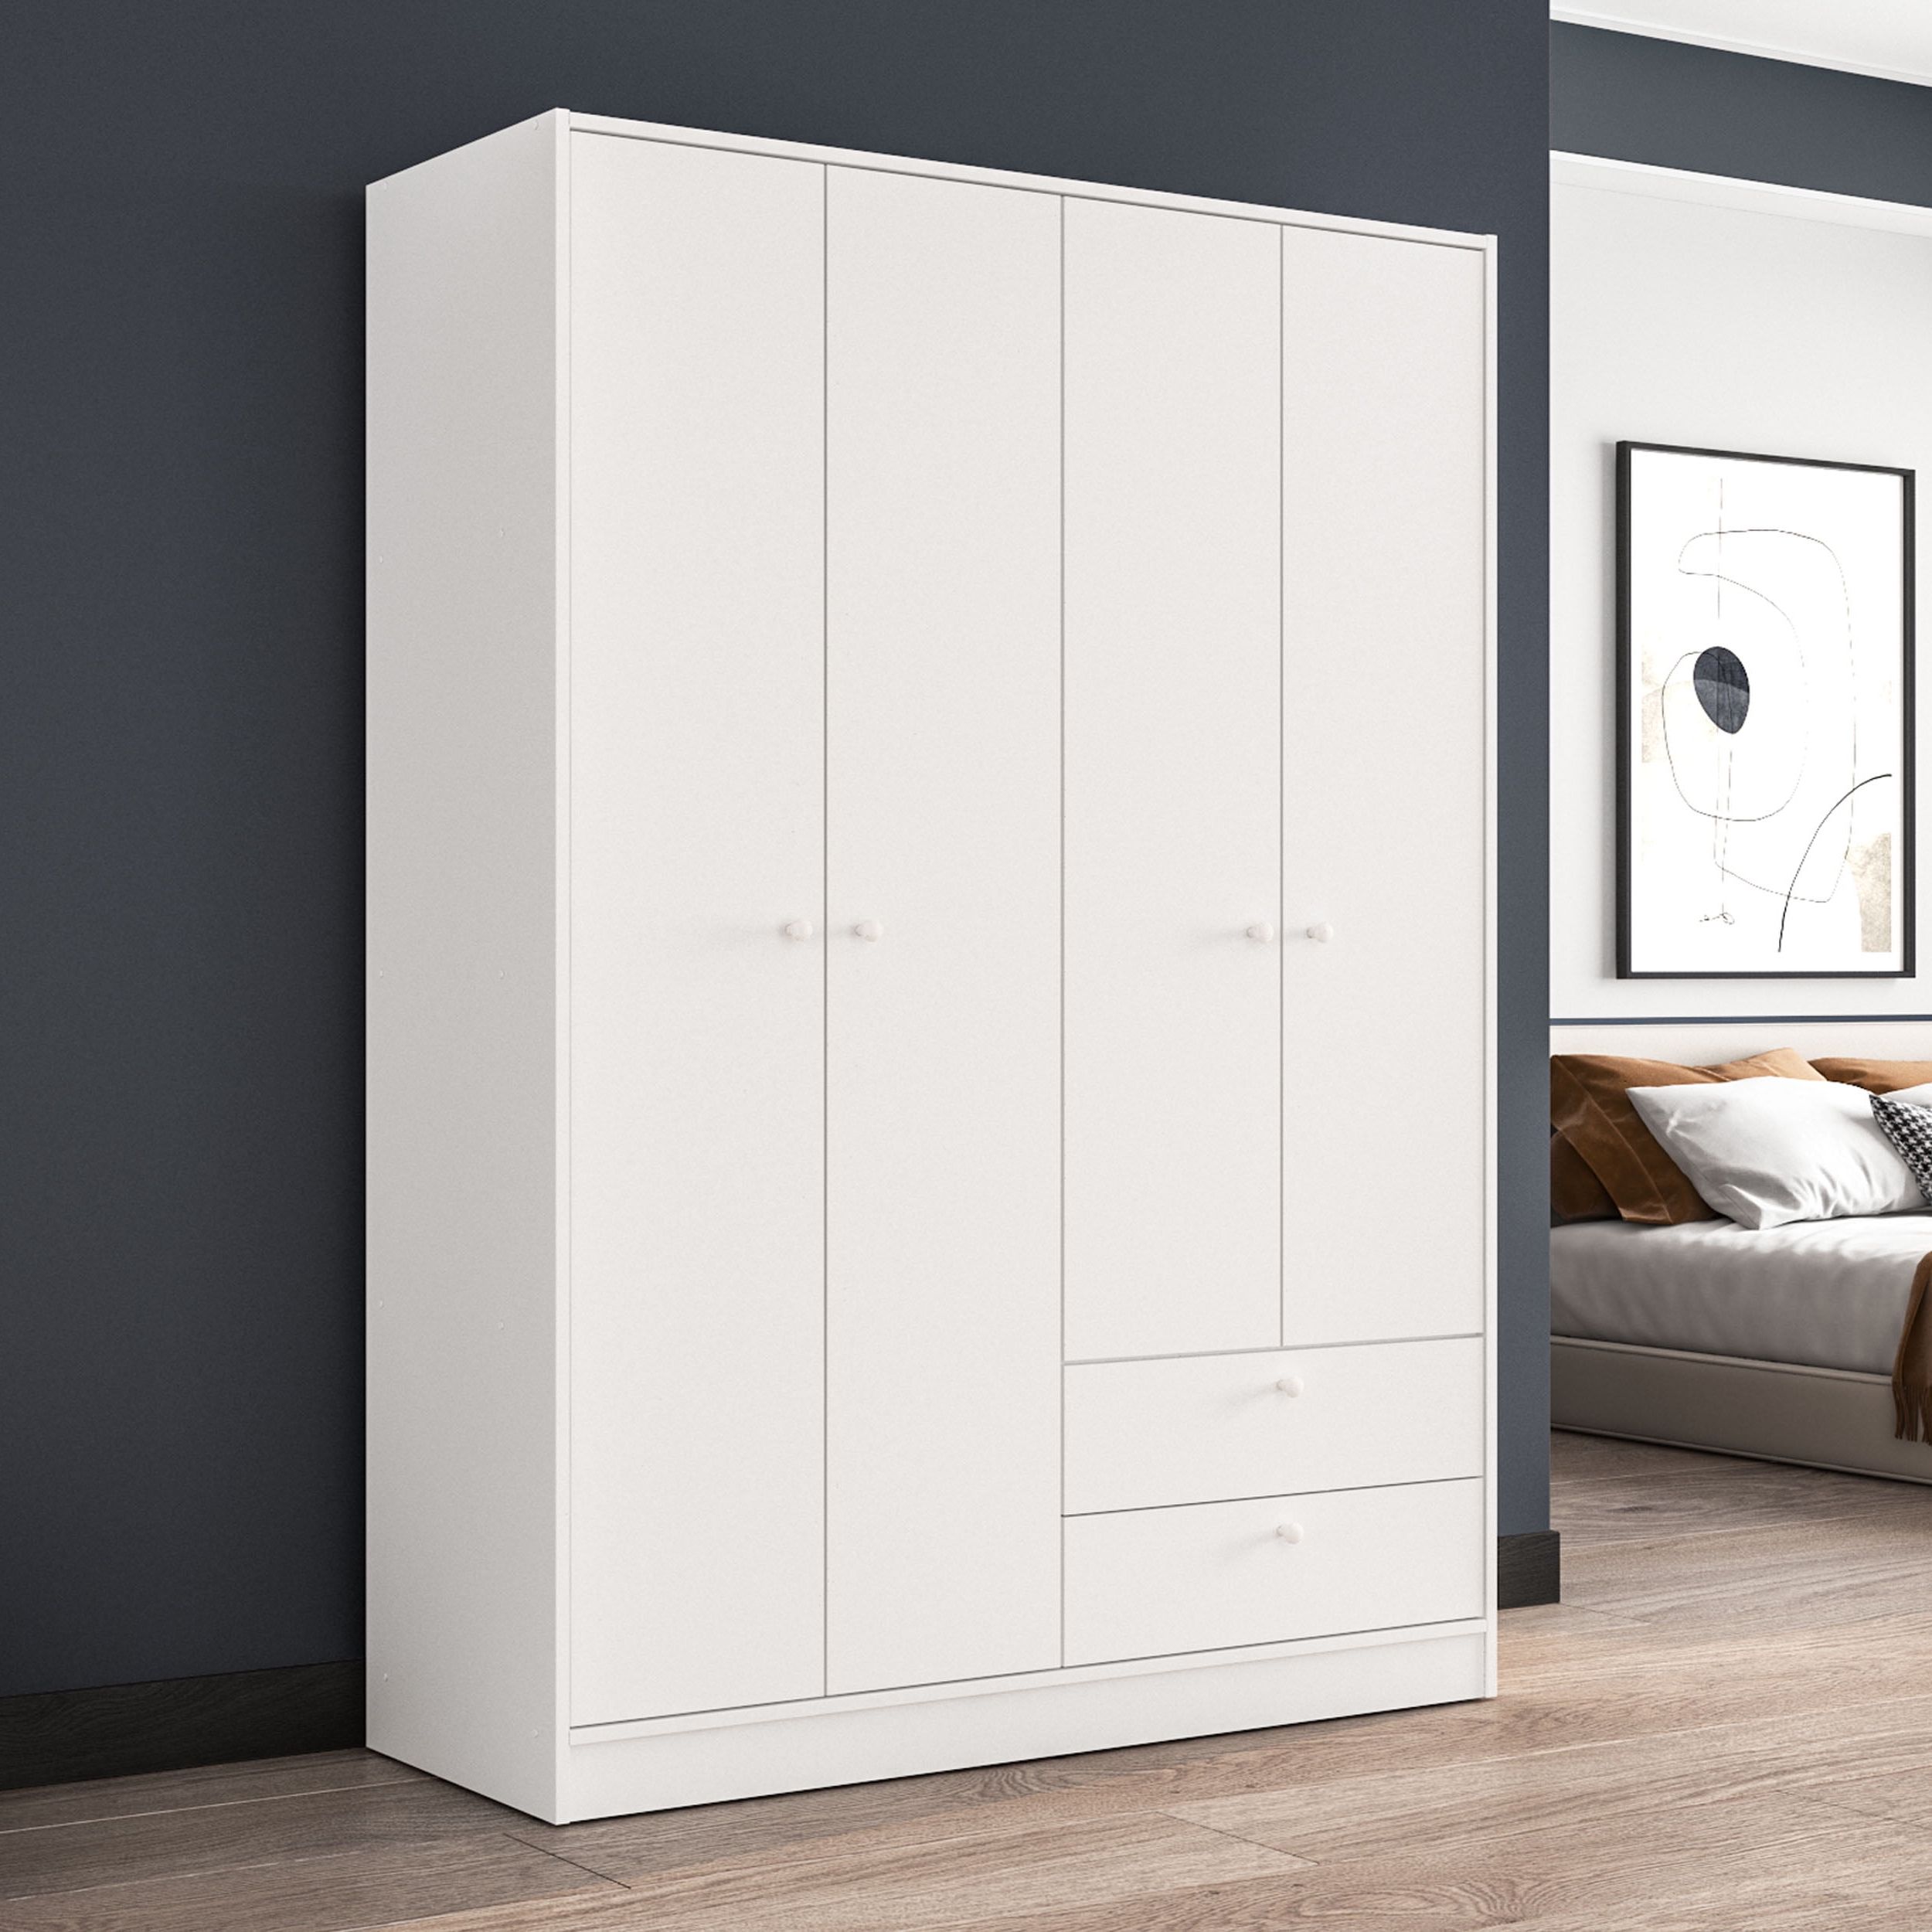 Polifurniture Denmark 4 Door Bedroom Armoire With Drawers, White –  Walmart With Regard To White Wardrobes With Drawers (Gallery 17 of 20)